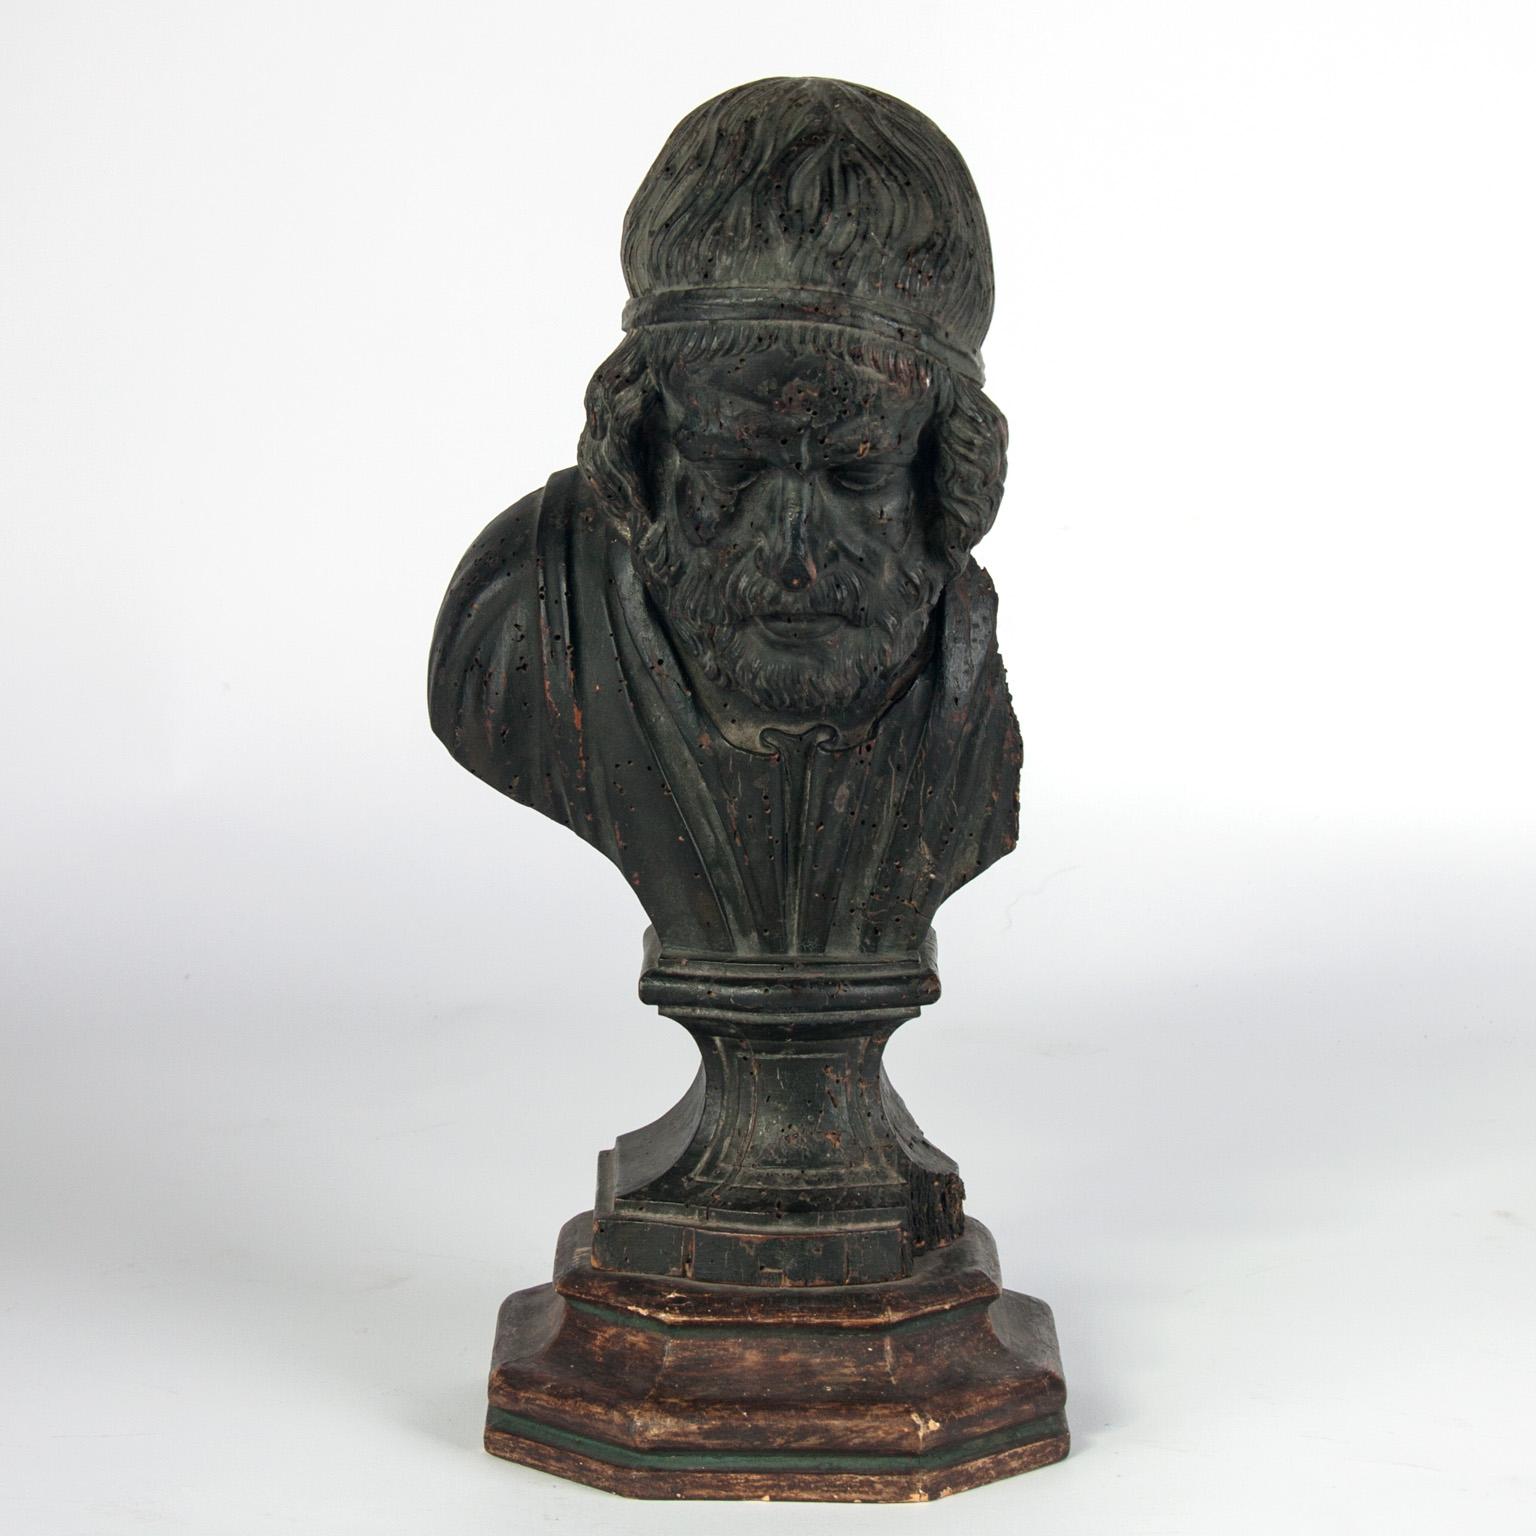 Late 17th century wooden bust of the Greek poet Homerus.
Damage on the right side of the bust, see picture.